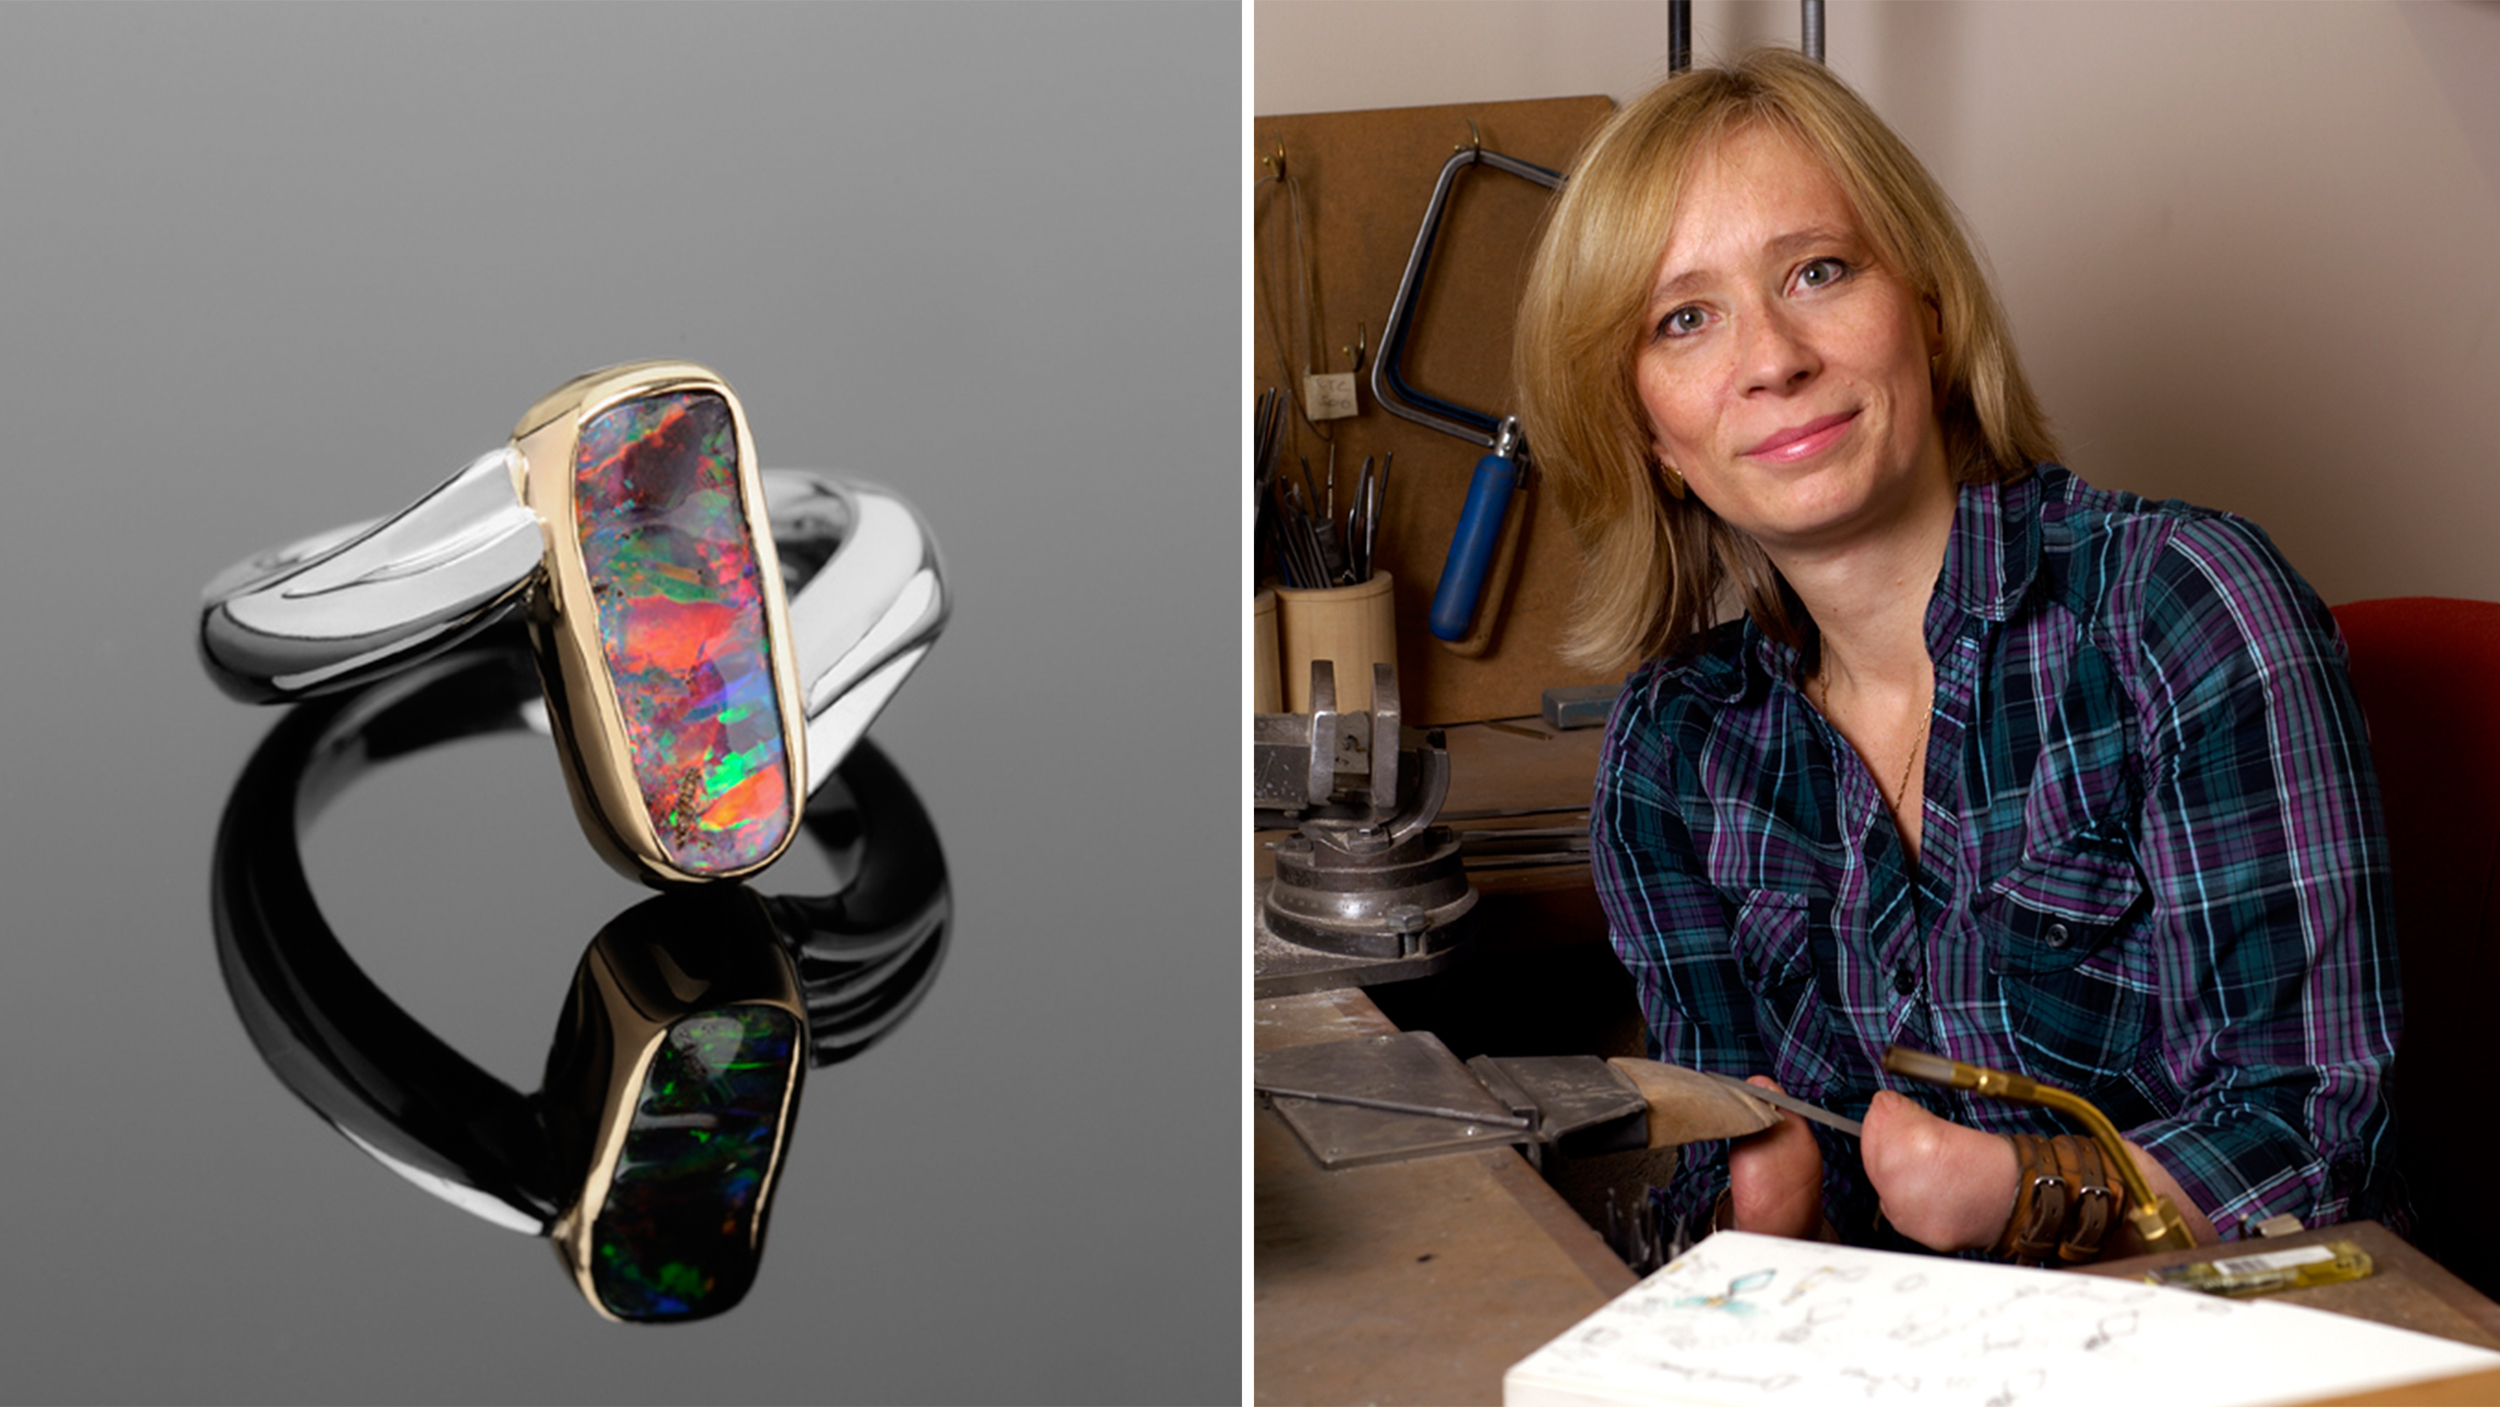 Rare gem: This woman crafts artistic jewelry -- without fingers